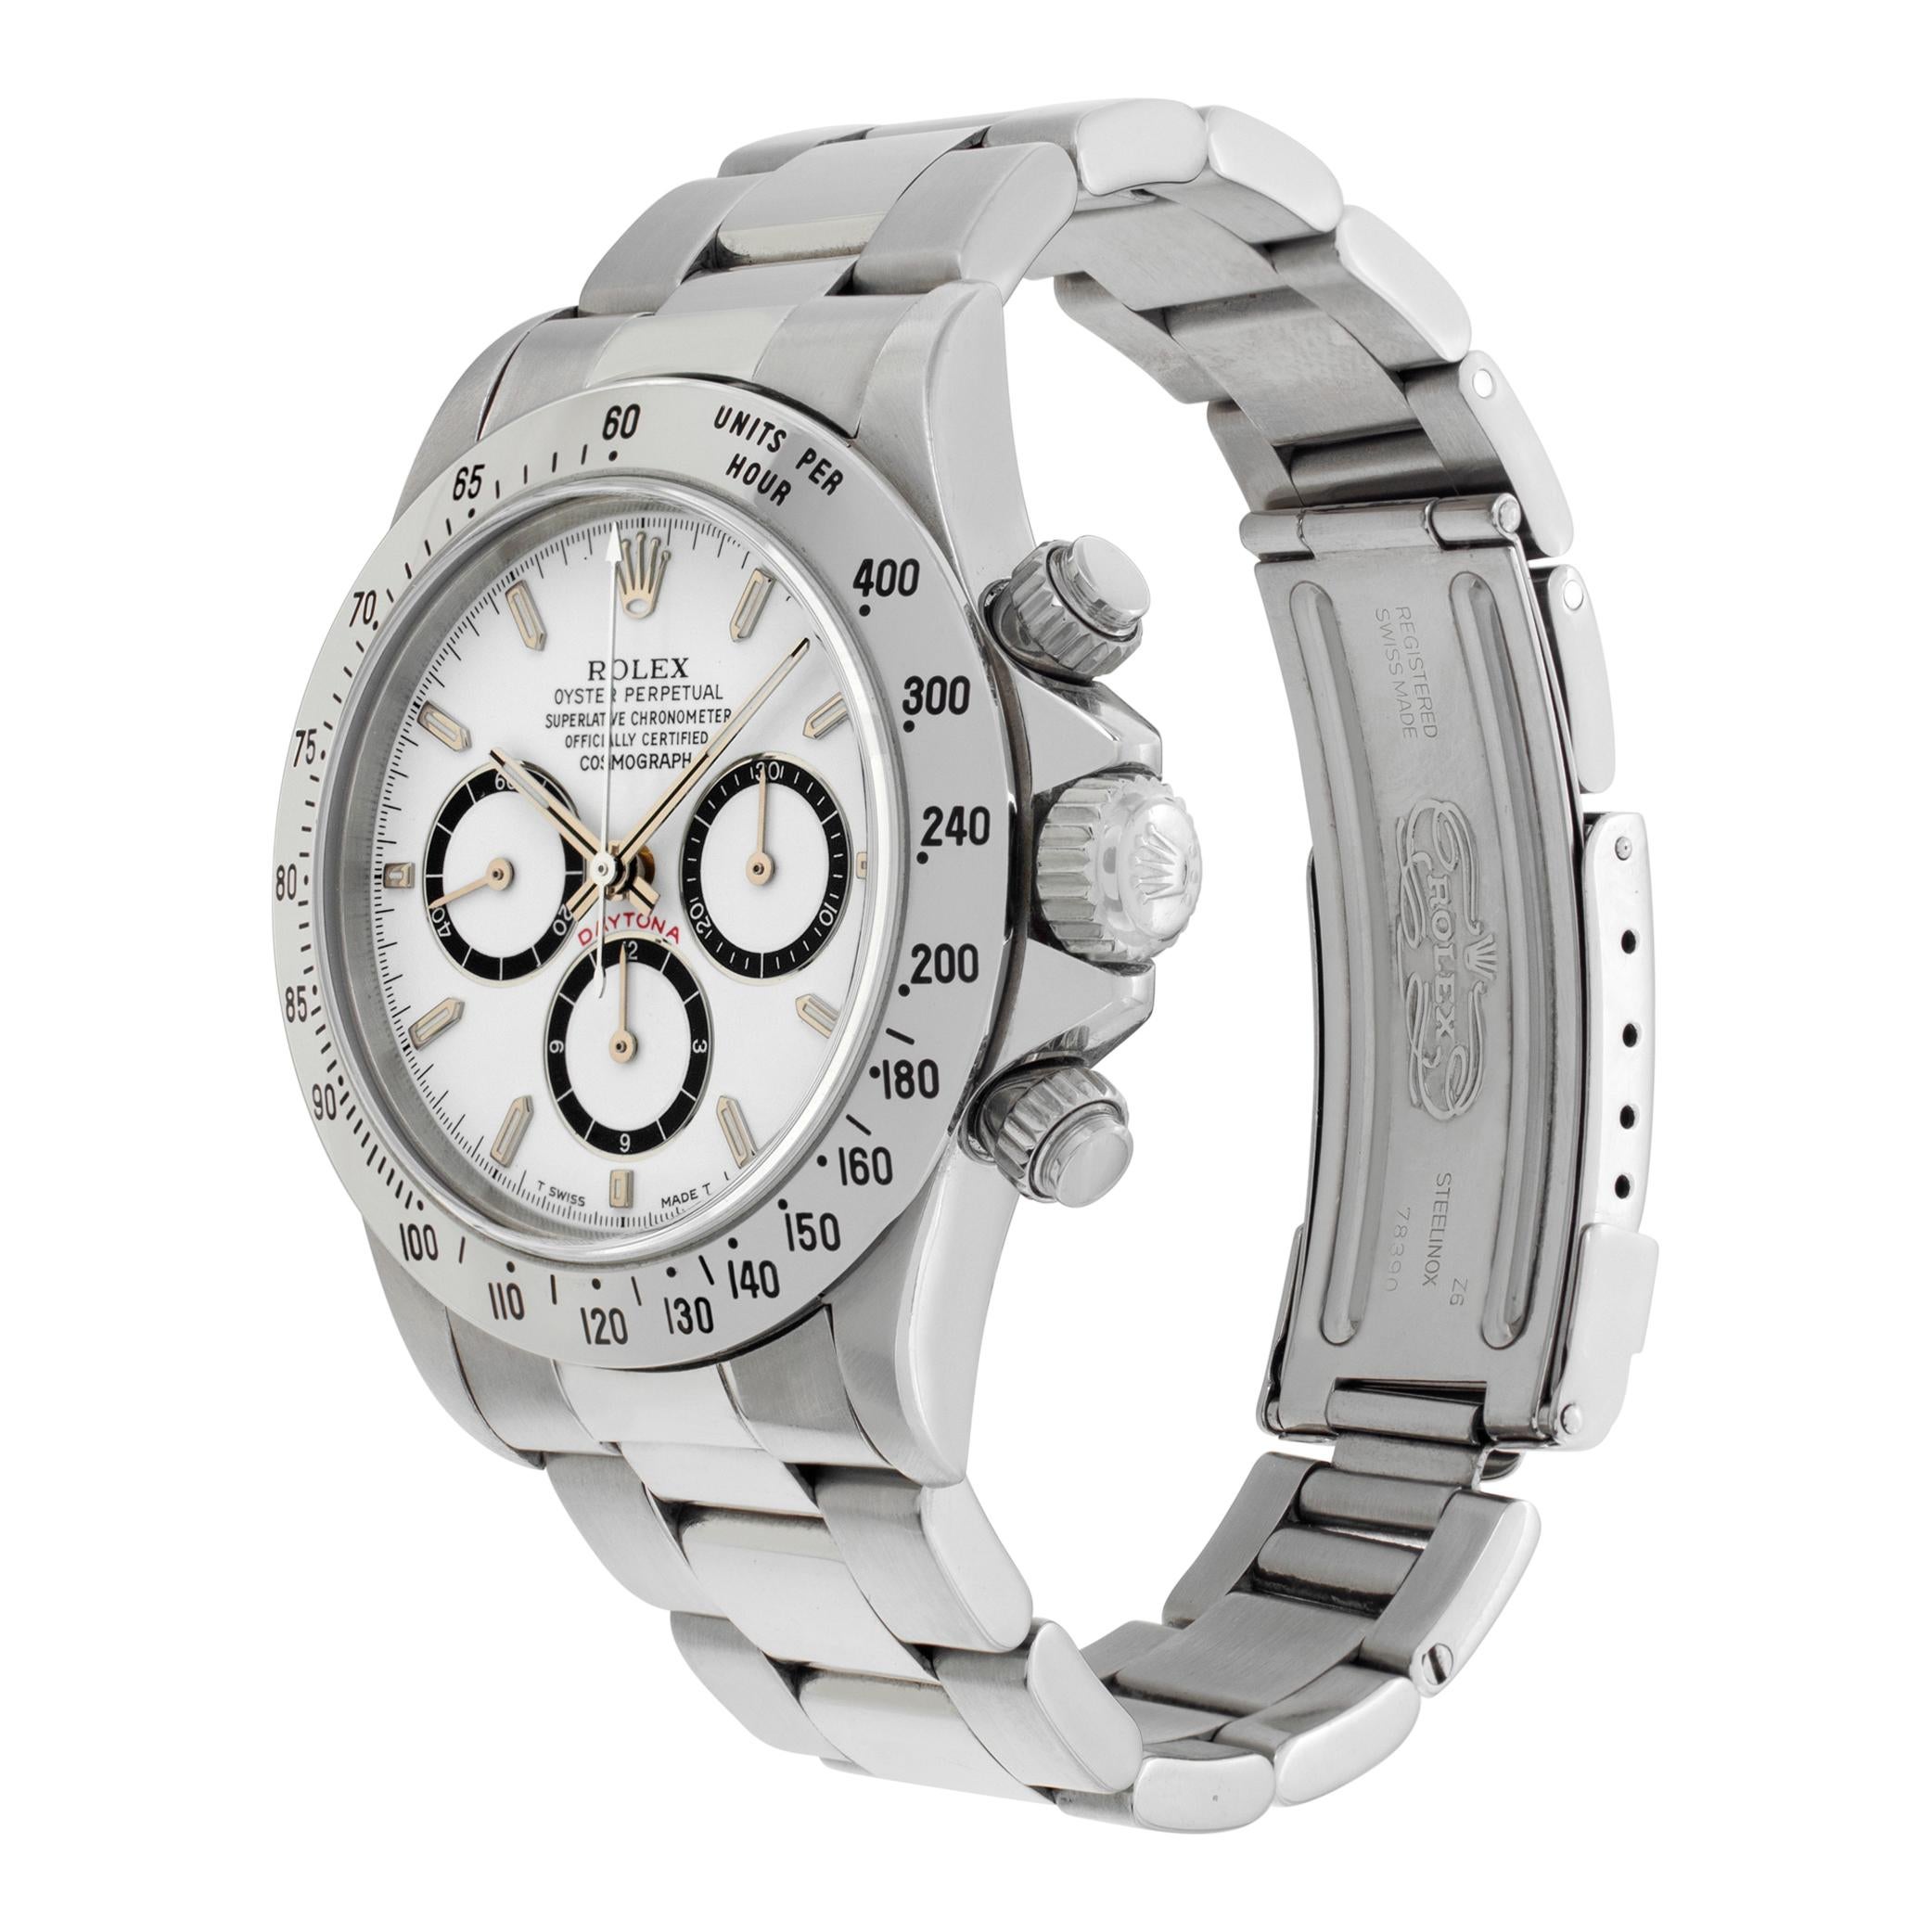 Rolex Daytona in stainless steel. Automatic Zenith movement w/ subseconds and chronograph. 40 mm case size. Circa 1989. Ref 16520.  **Bank wire only at this price** Fine Pre-owned Rolex Watch. Certified preowned Sport Rolex Daytona 16520 watch is